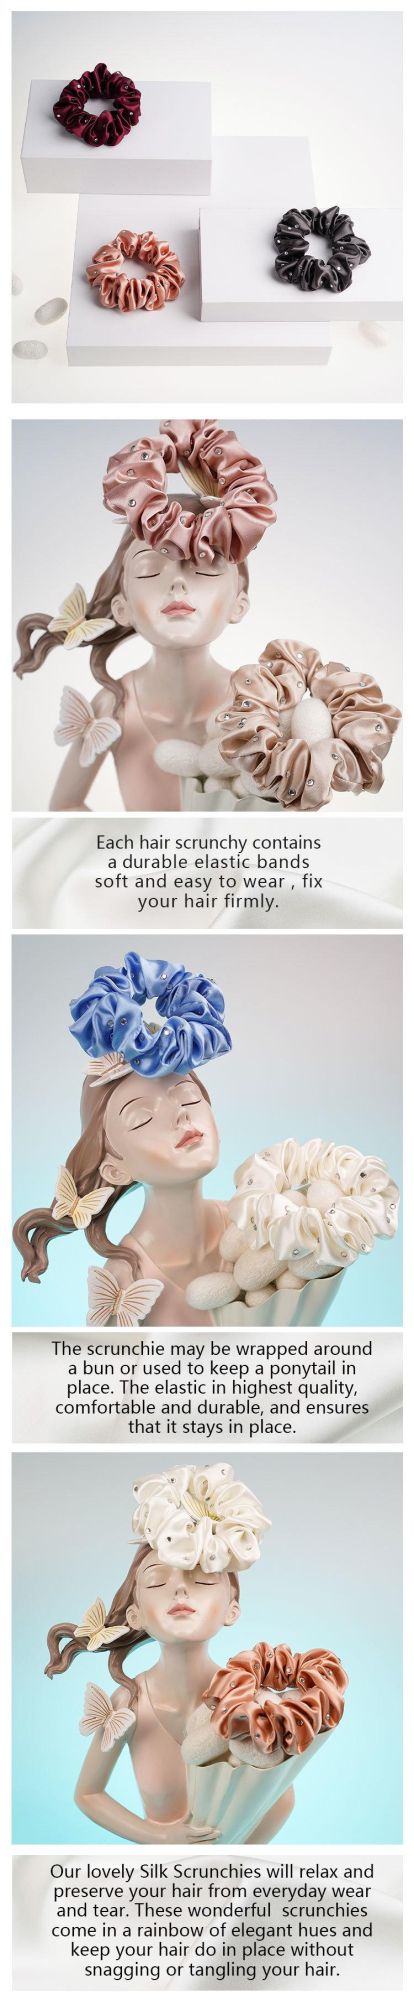 Crystal Silk Scrunchies for Luxury Style with High Quality Woman